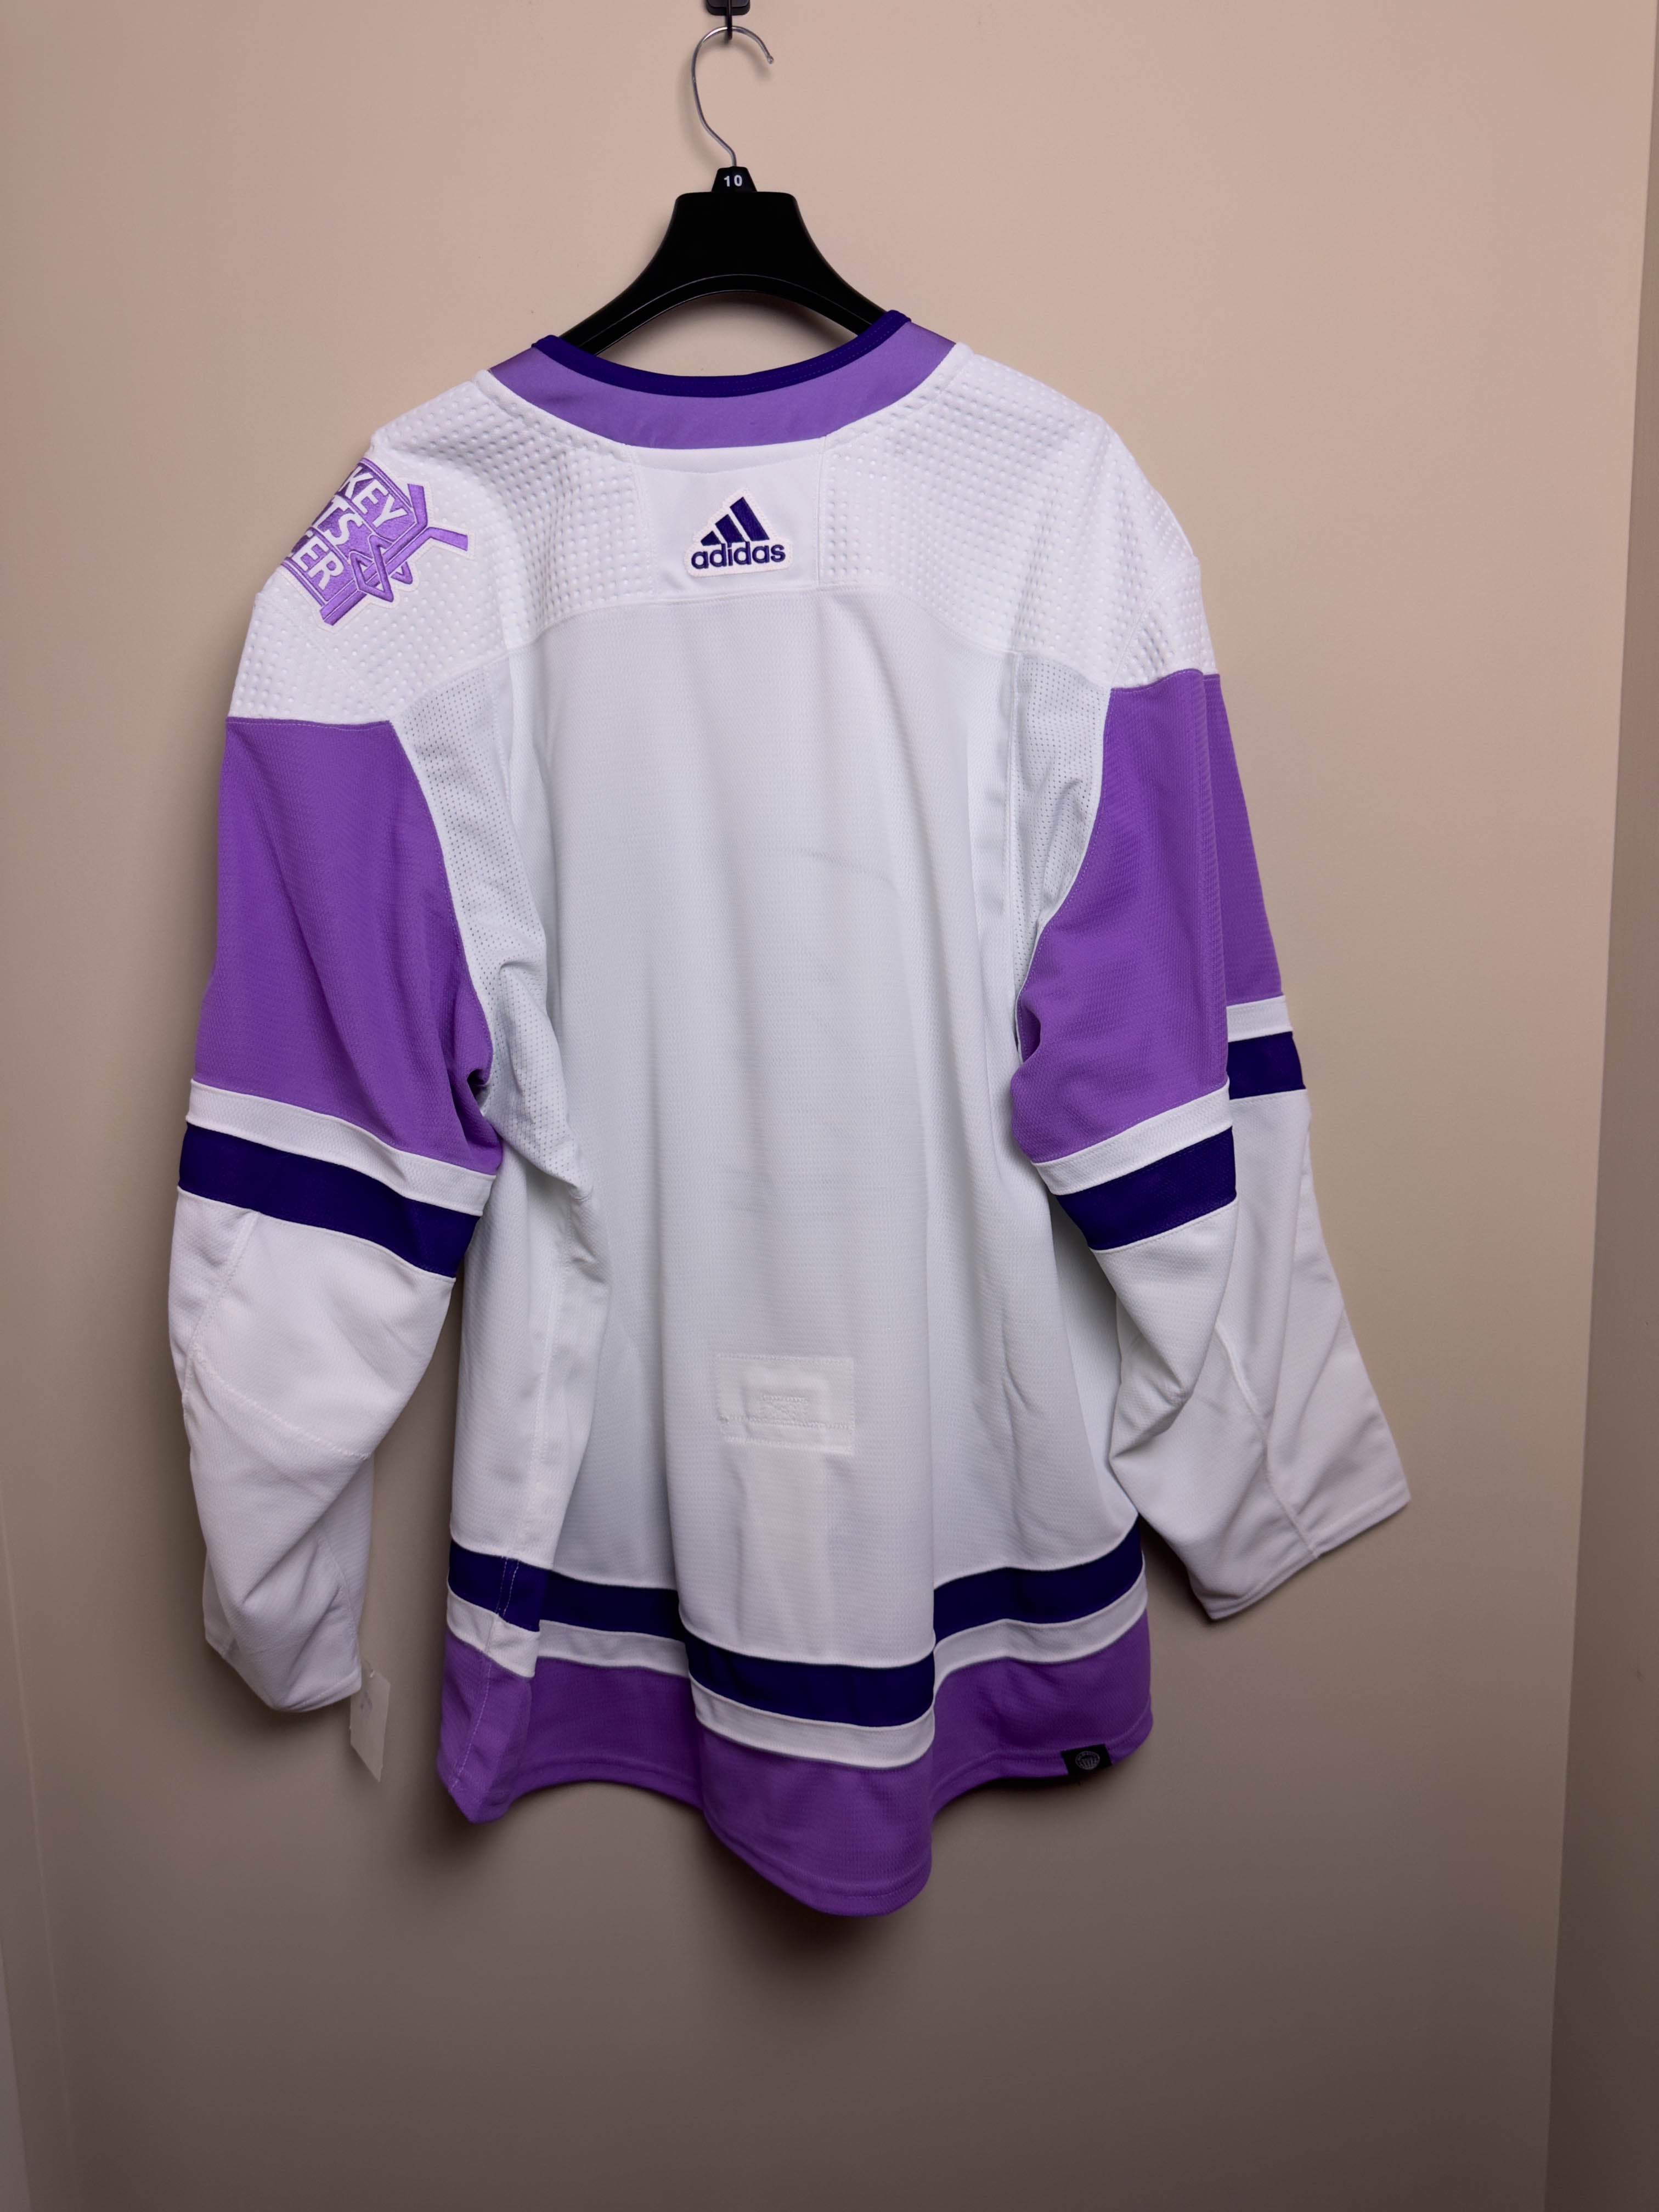 Tampa Bay Lightning NHL Adidas MiC Team Issued Hockey Fights Cancer Jersey Size 60 (Player Size)